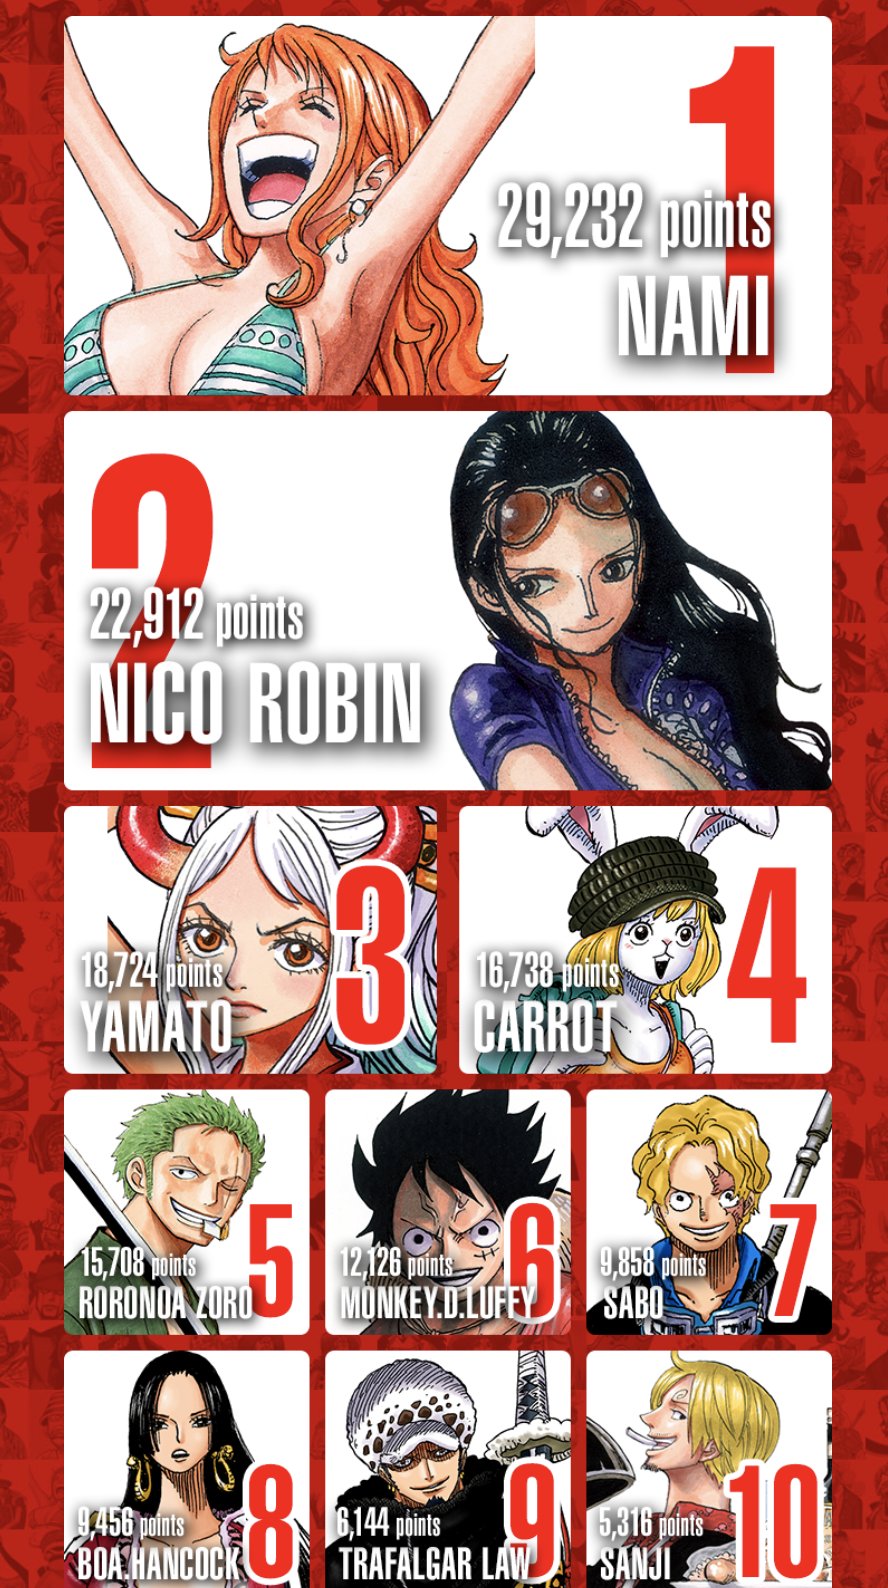 Artur Library Of Ohara One Piece Worldwide Popularity Poll Top 100 Full Results With Vote Tally For The Region Of Oceania T Co Hae1nsgoid Twitter